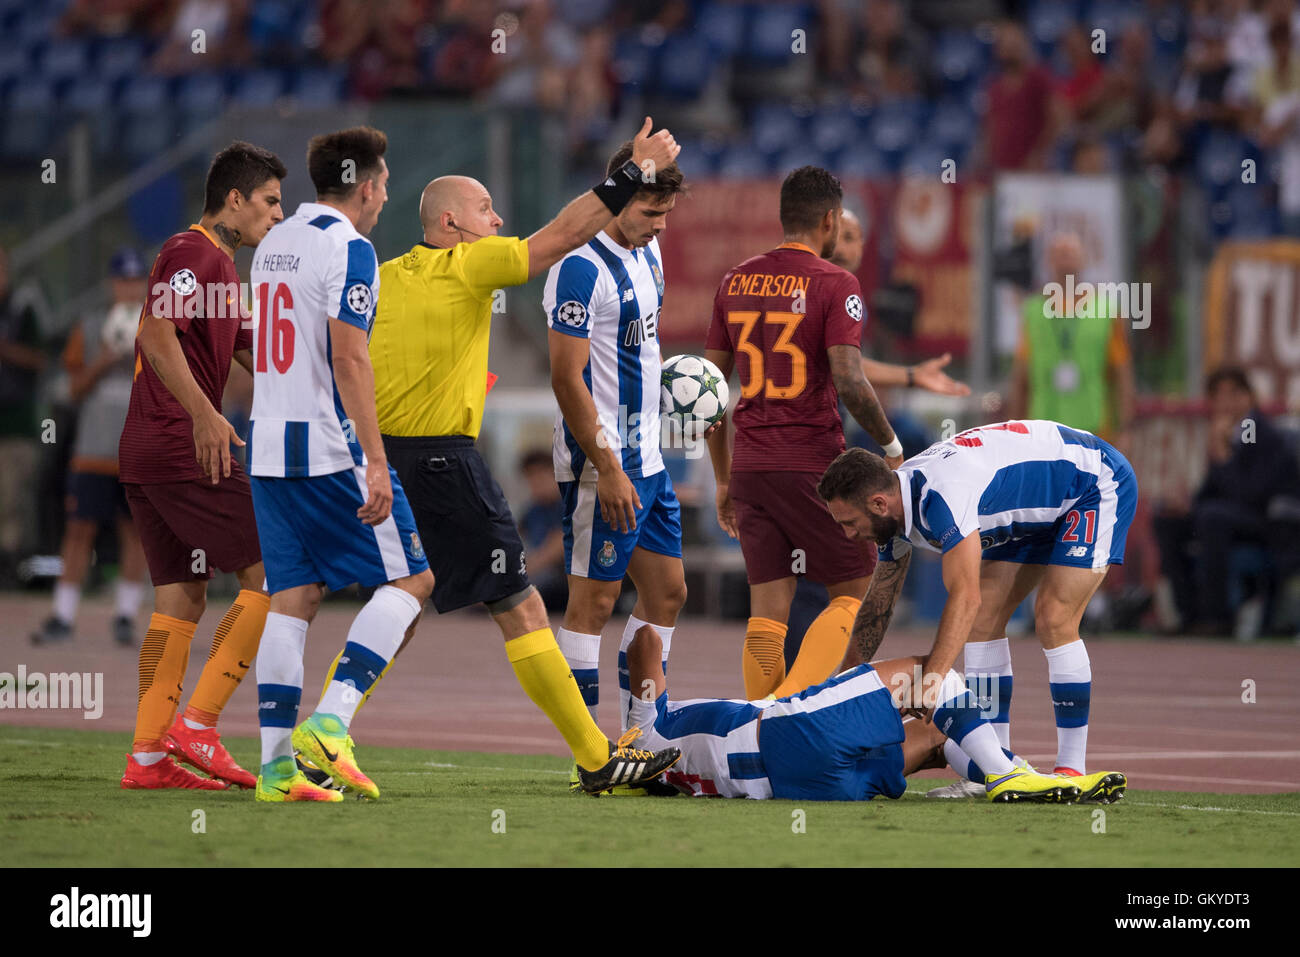 Rome, Italy. 23rd Aug, 2016. Emerson (Roma) Football/Soccer : Emerson of AS Roma leaves the pitch after being sent off during the UEFA Champions League Play-off 2nd leg match between AC Roma 0-3 FC Porto at Stadio Olimpico in Rome, Italy . © Maurizio Borsari/AFLO/Alamy Live News Stock Photo